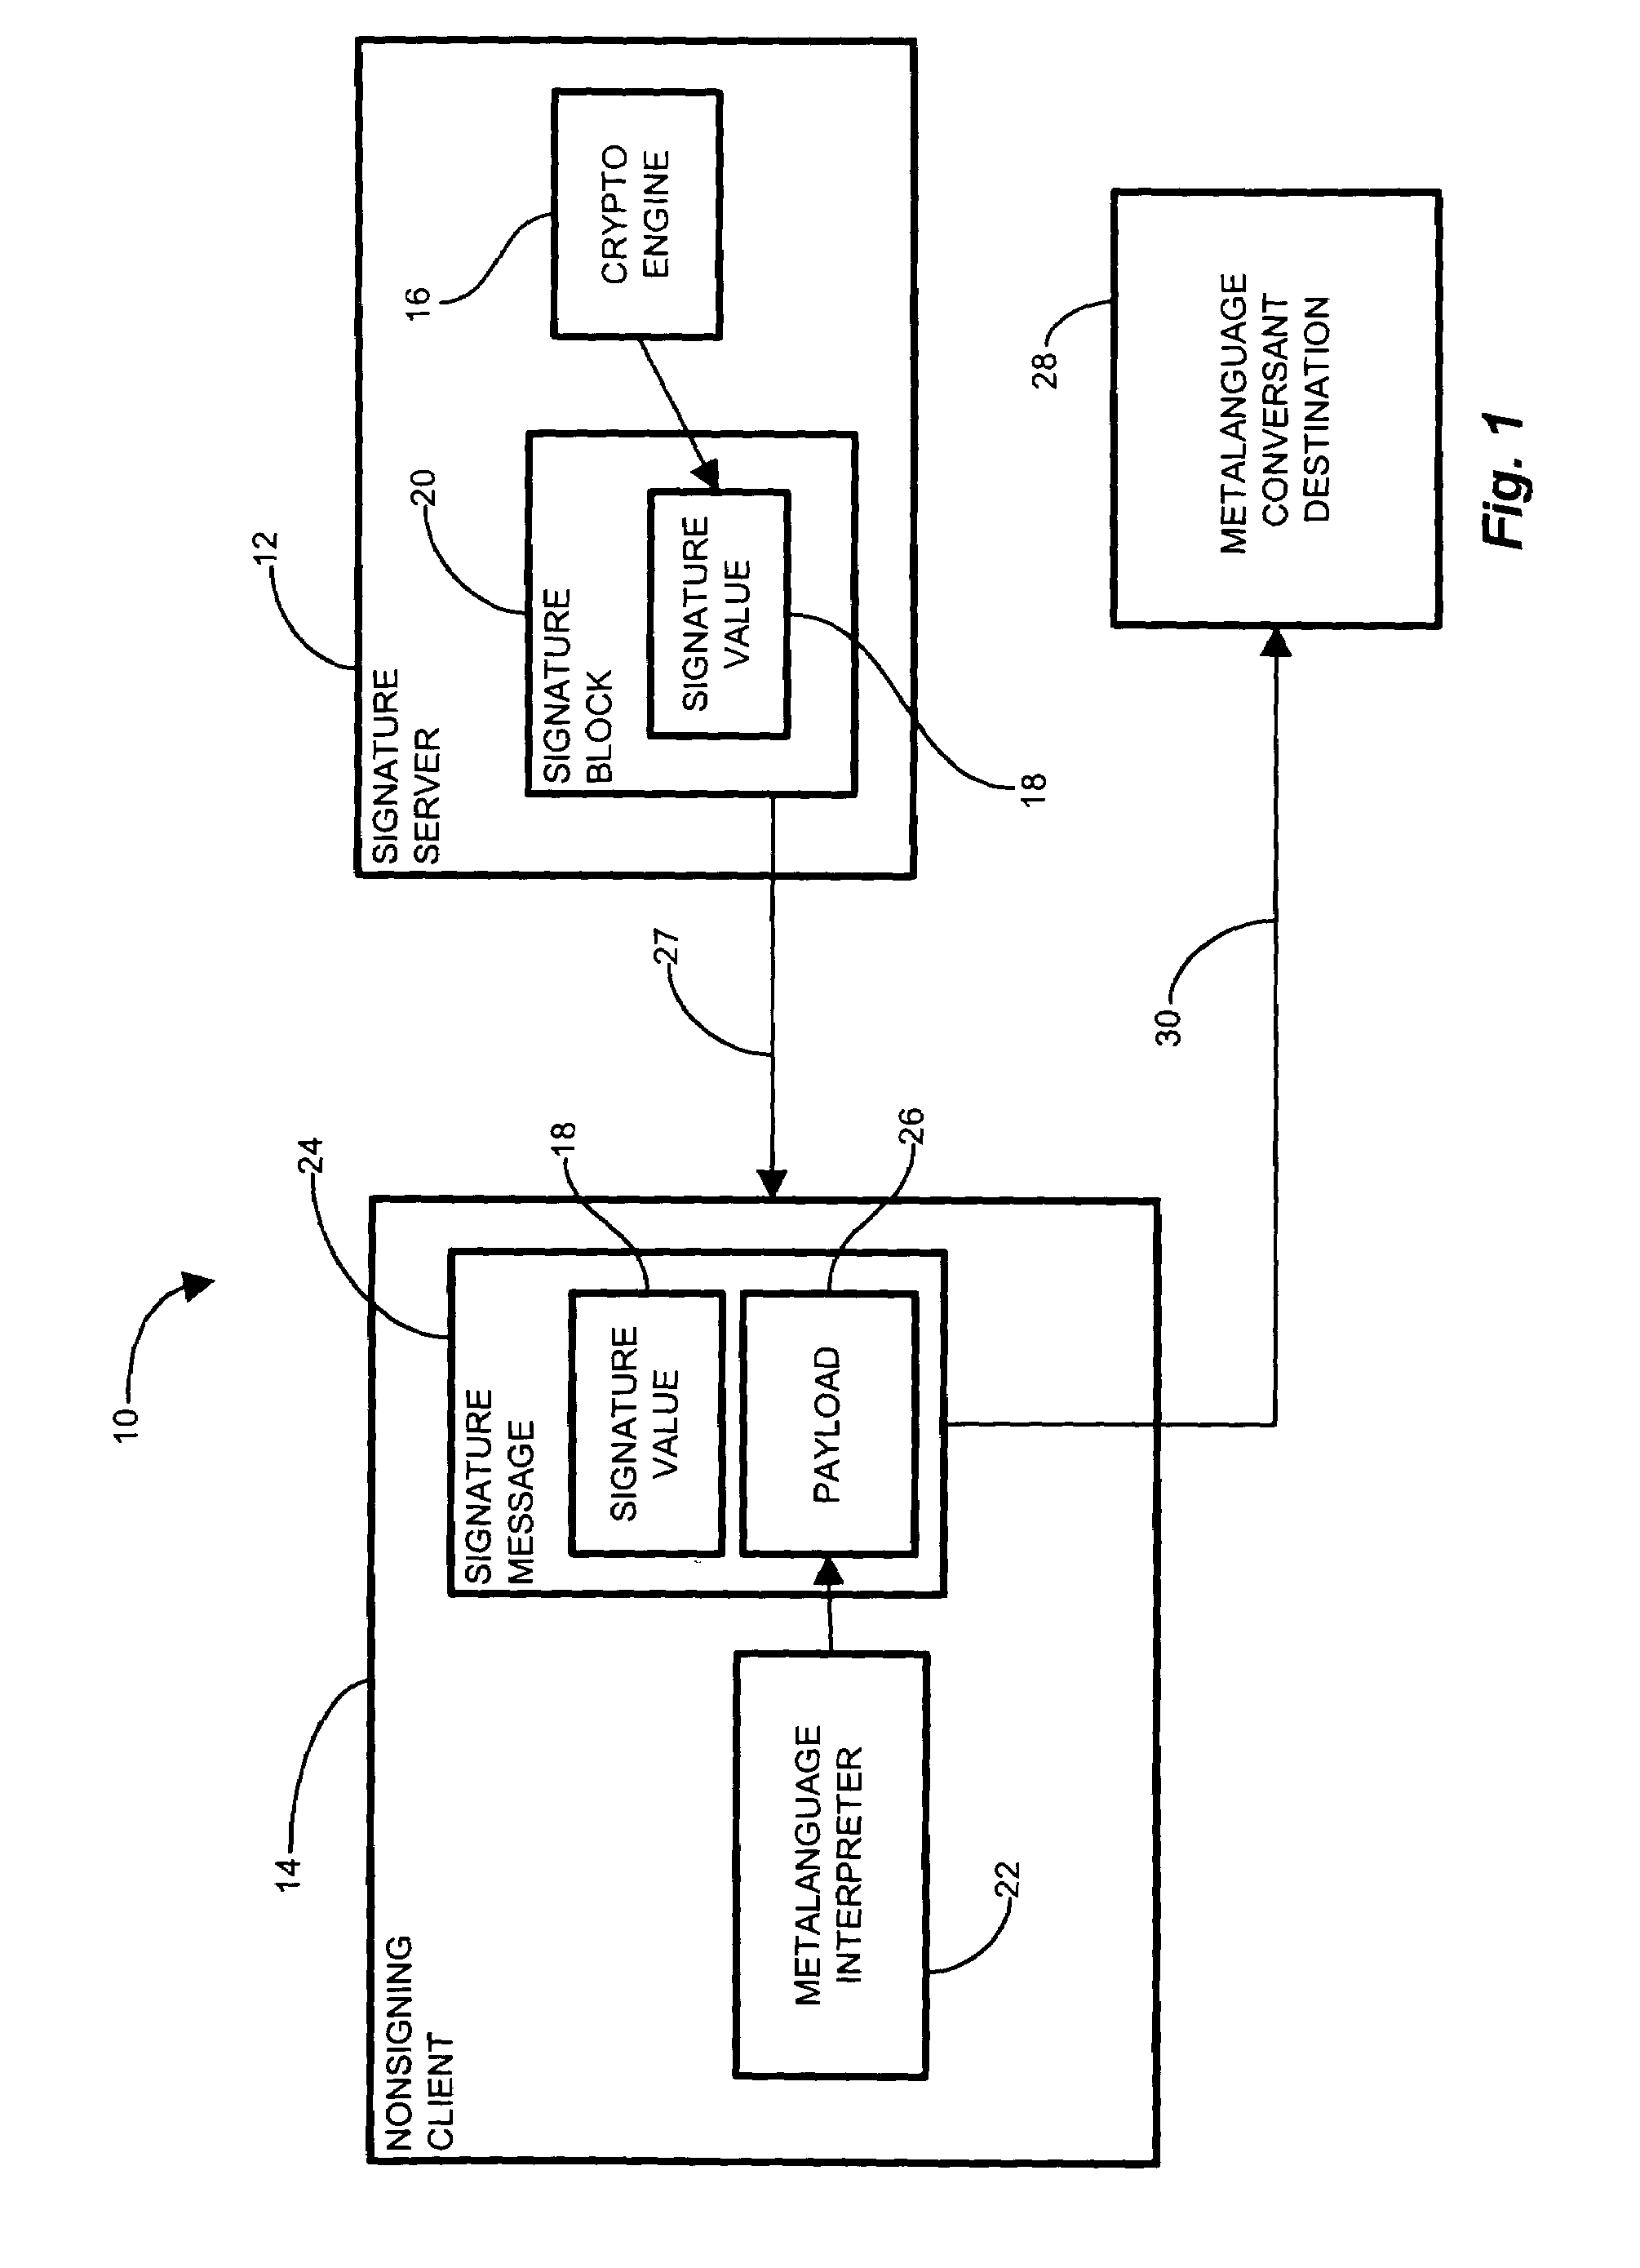 System and methods for using a signature protocol by a nonsigning client